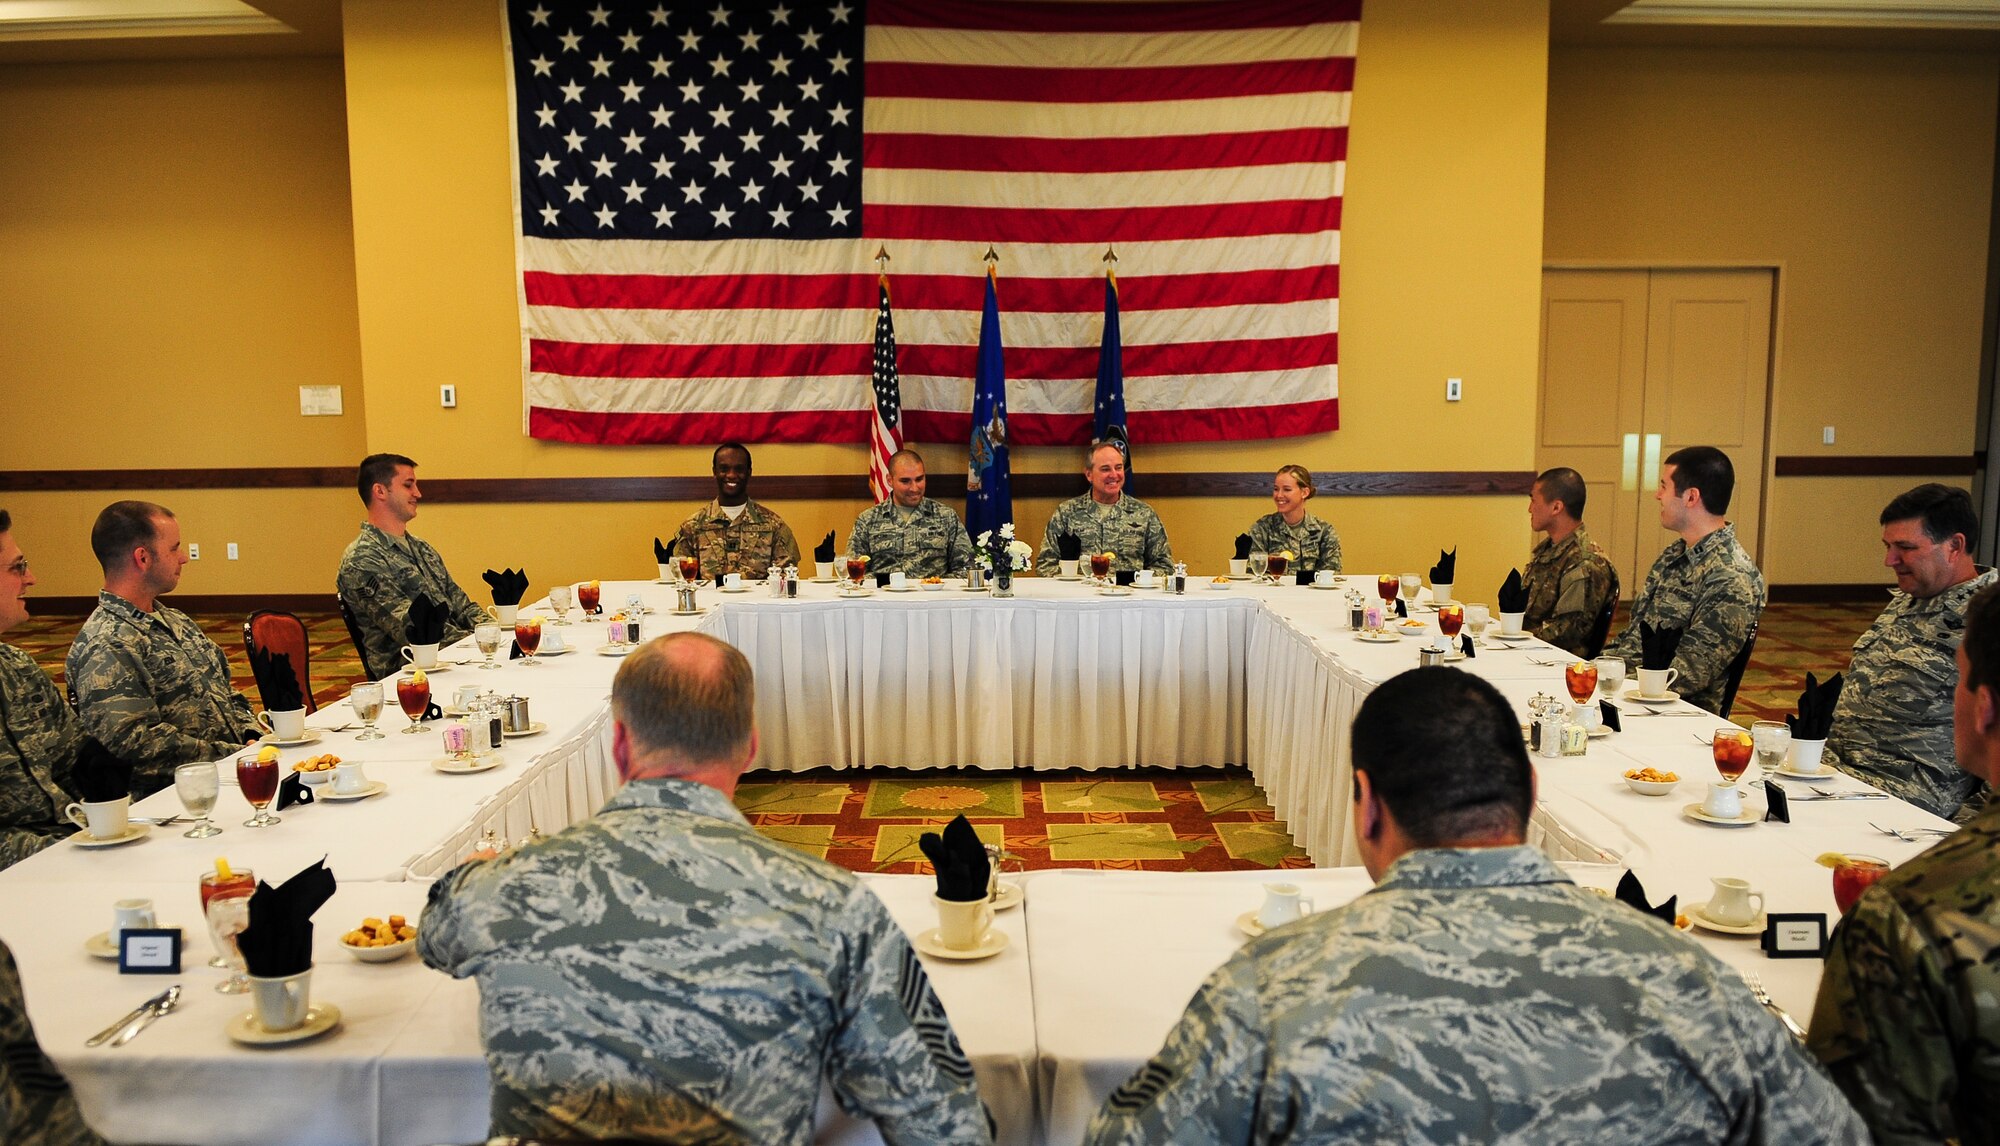 Air Force Chief of Staff Gen. Mark A. Welsh III and Chief Master Sgt. James A. Cody attend a lunch with company grade officers and NCOs at the Soundside on Hurlburt Field, Fla., Sept. 29, 2015. (U.S. Air Force photo by Senior Airman Meagan Schutter)